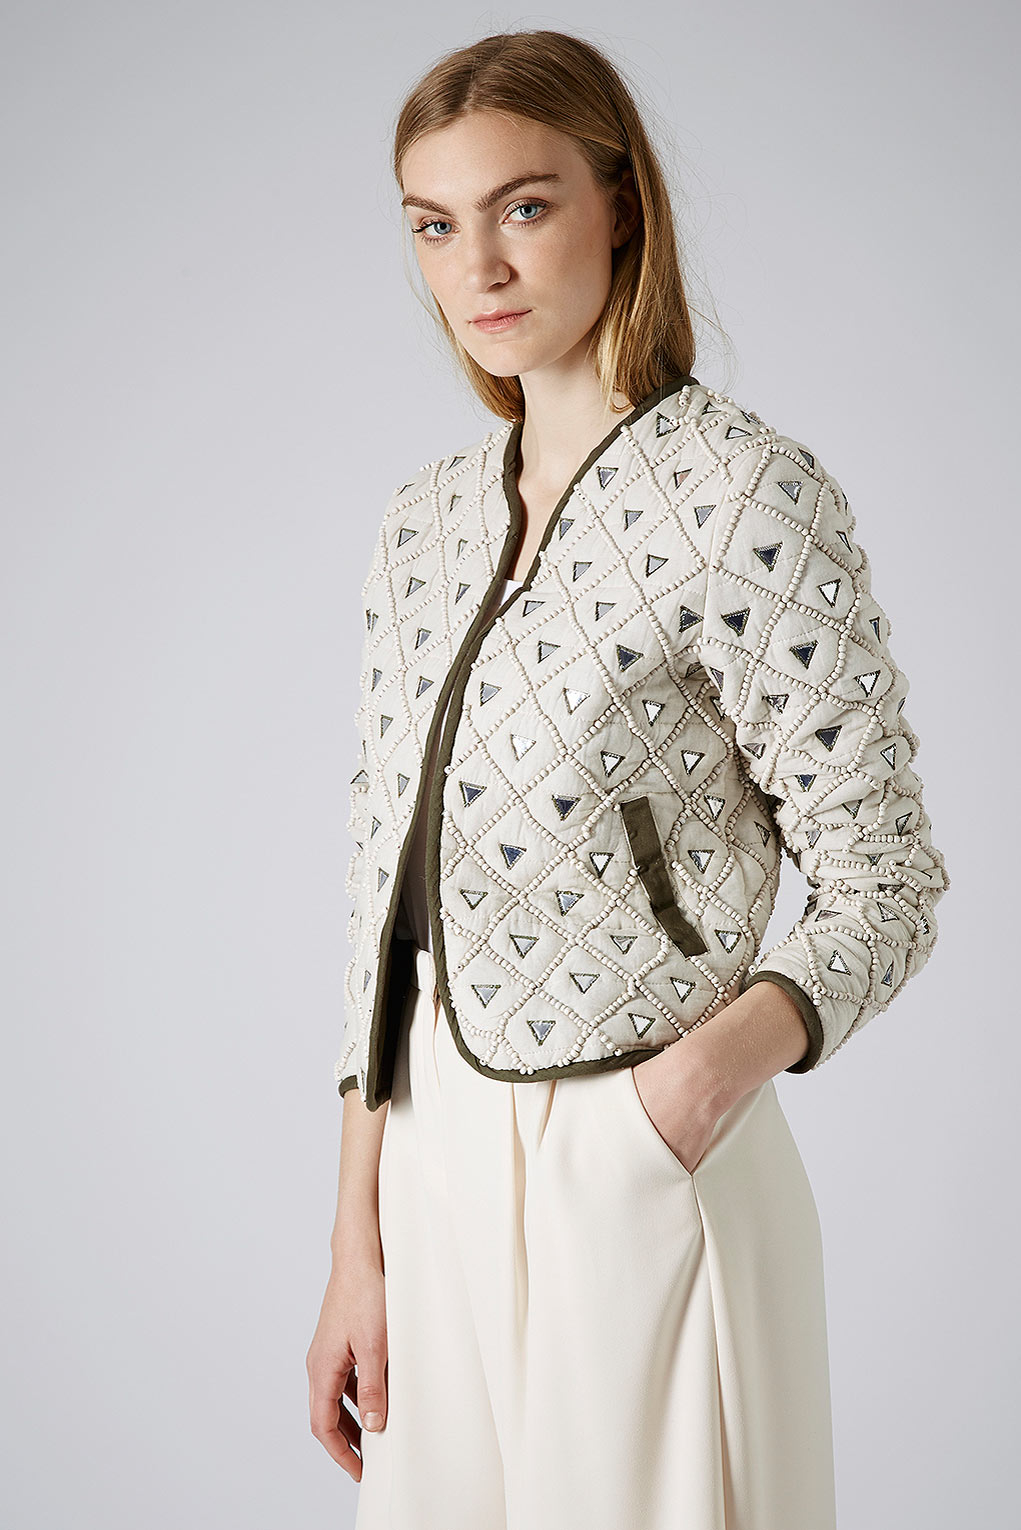 Lyst - Topshop Womens Beaded Embellished Jacket Off White in Natural